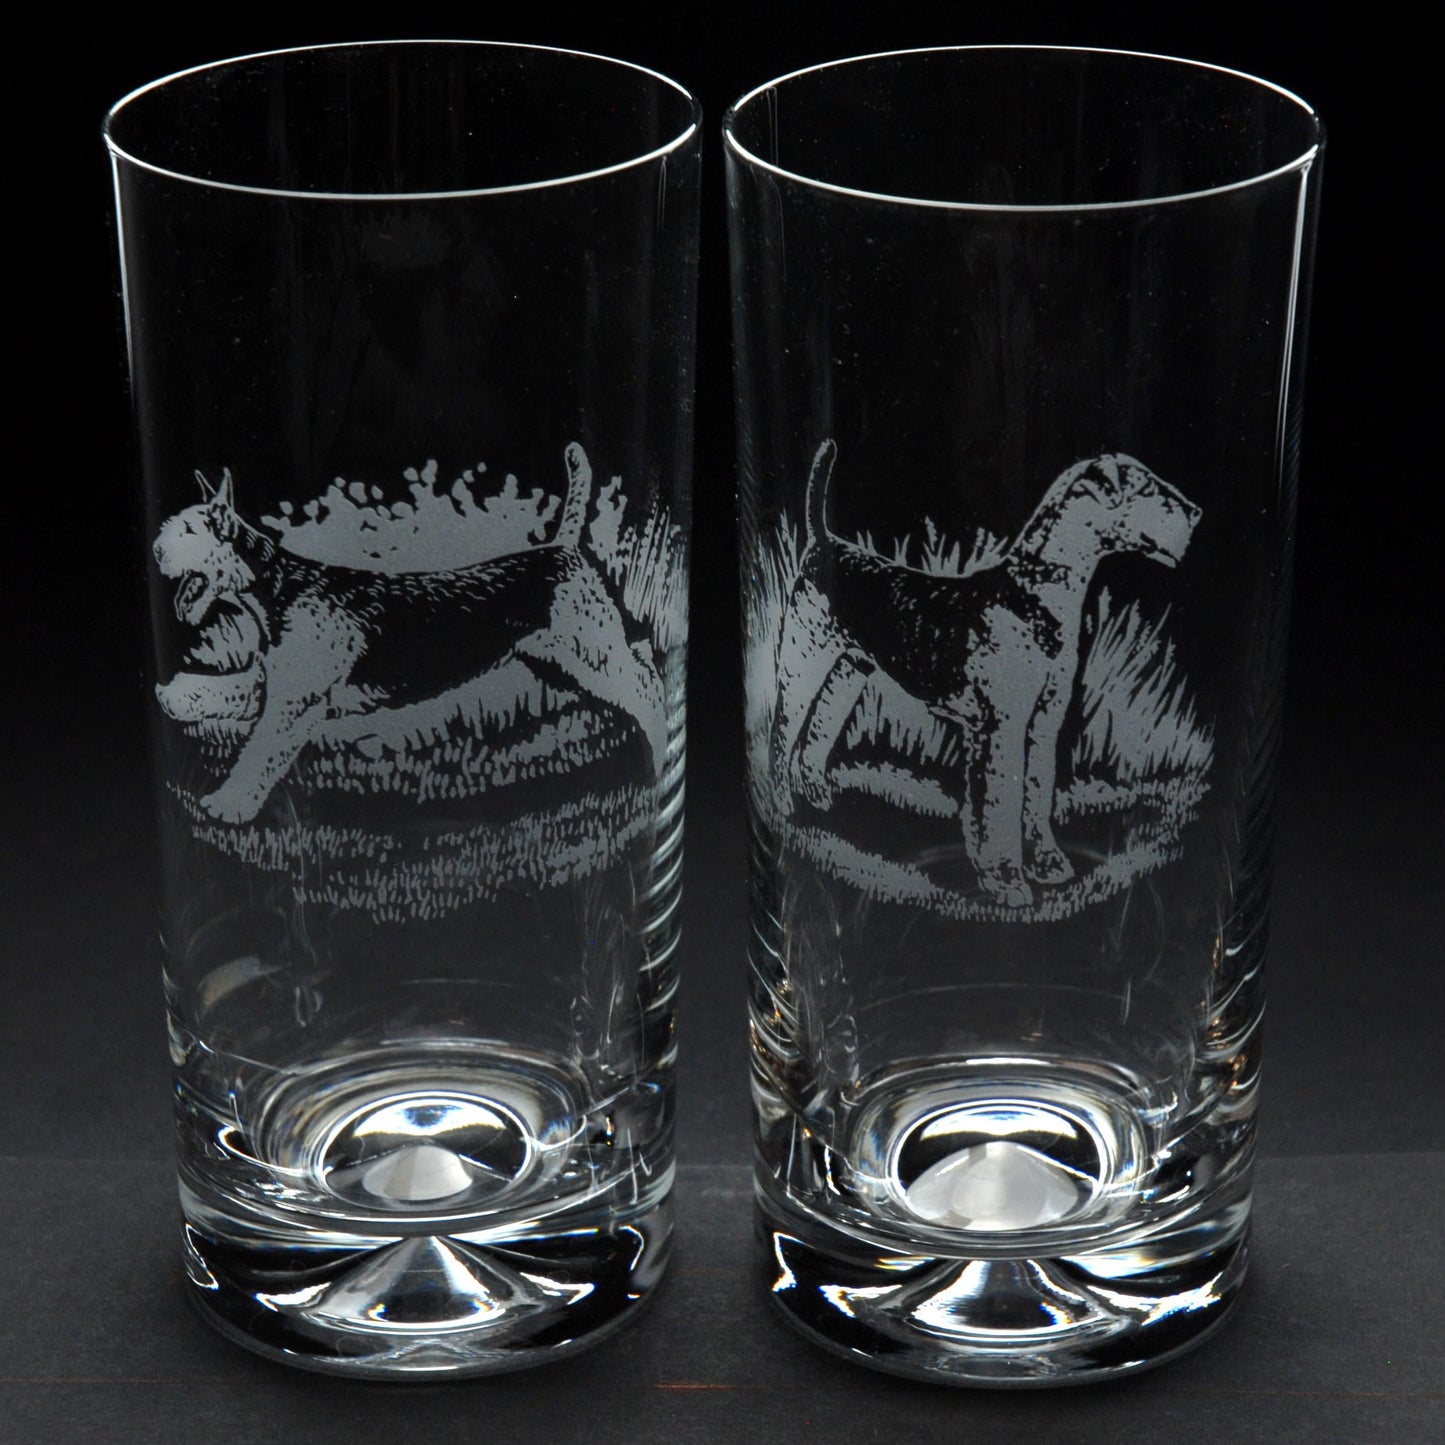 Airedale Terrier Dog Highball Glass - Hand Etched/Engraved Gift